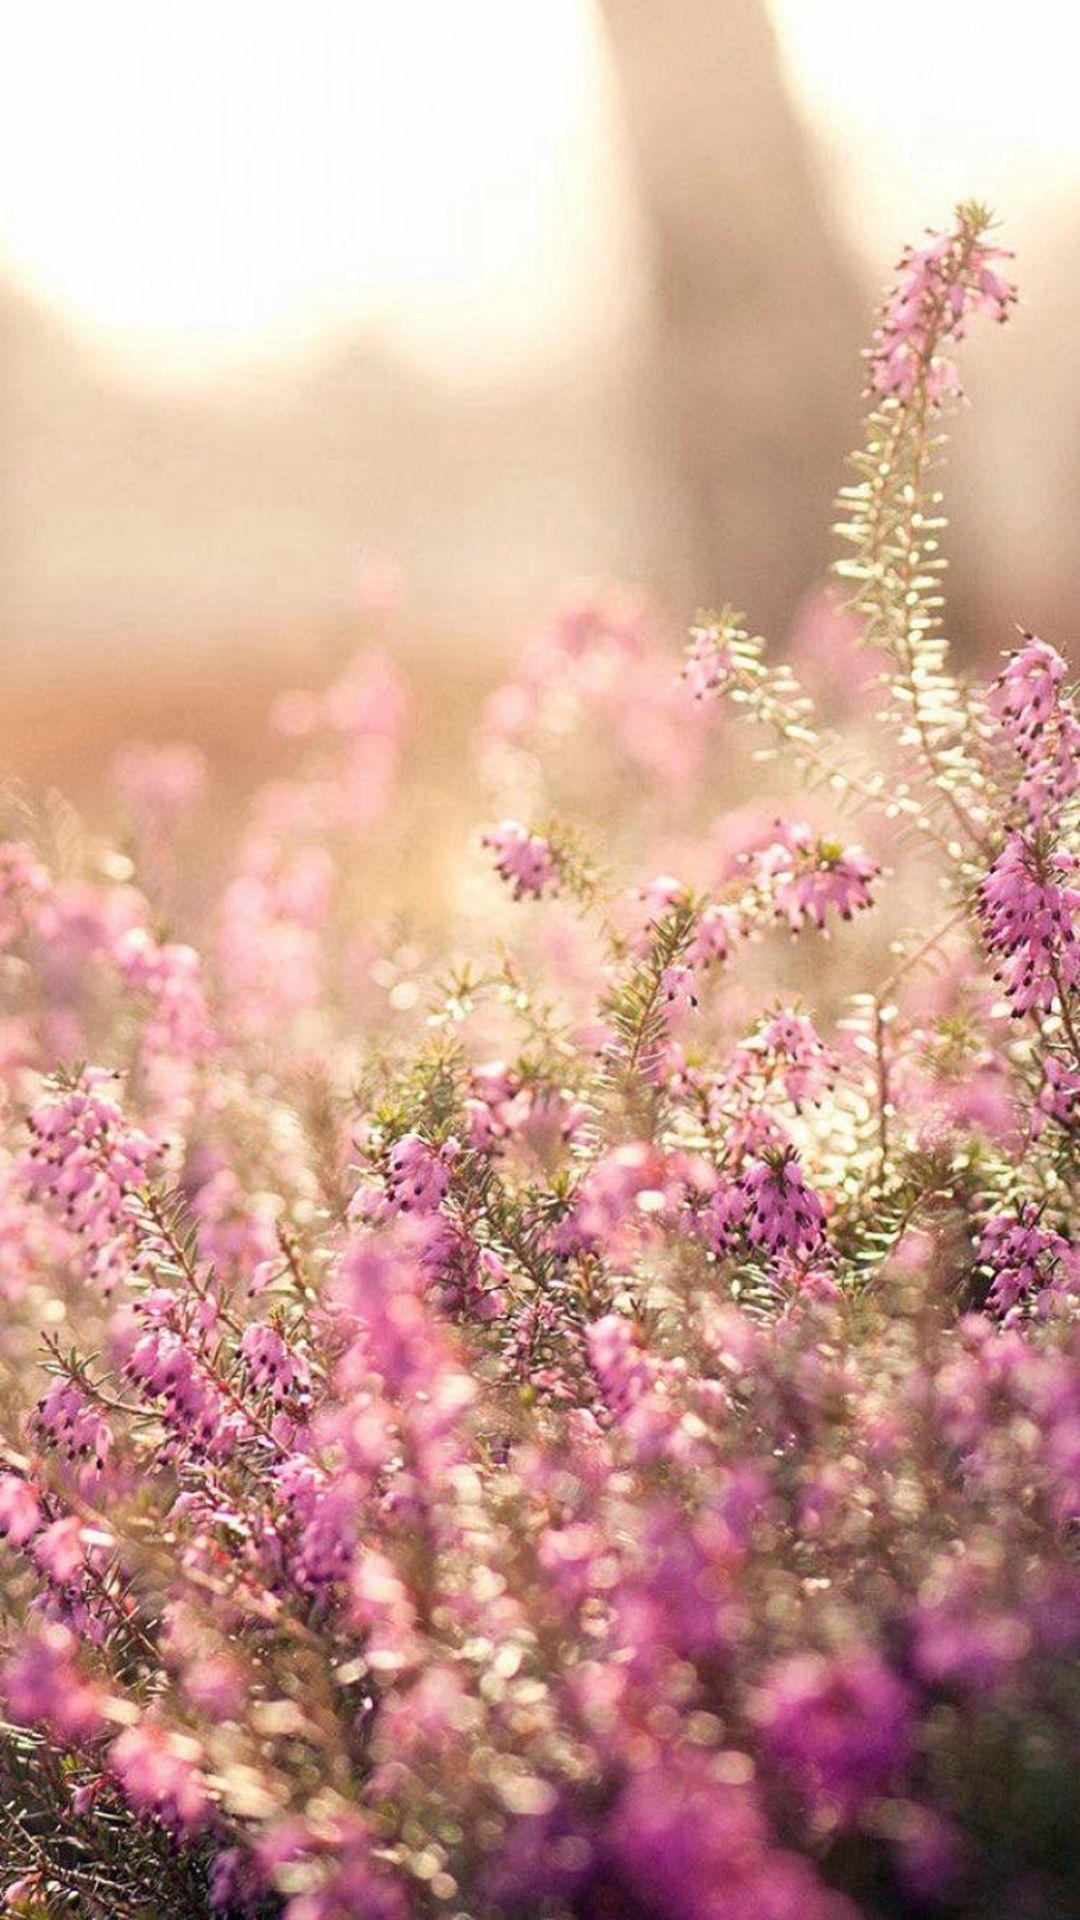 Nature Spring Bloomy Flowers Blurry iPhone 6 Wallpaper Download